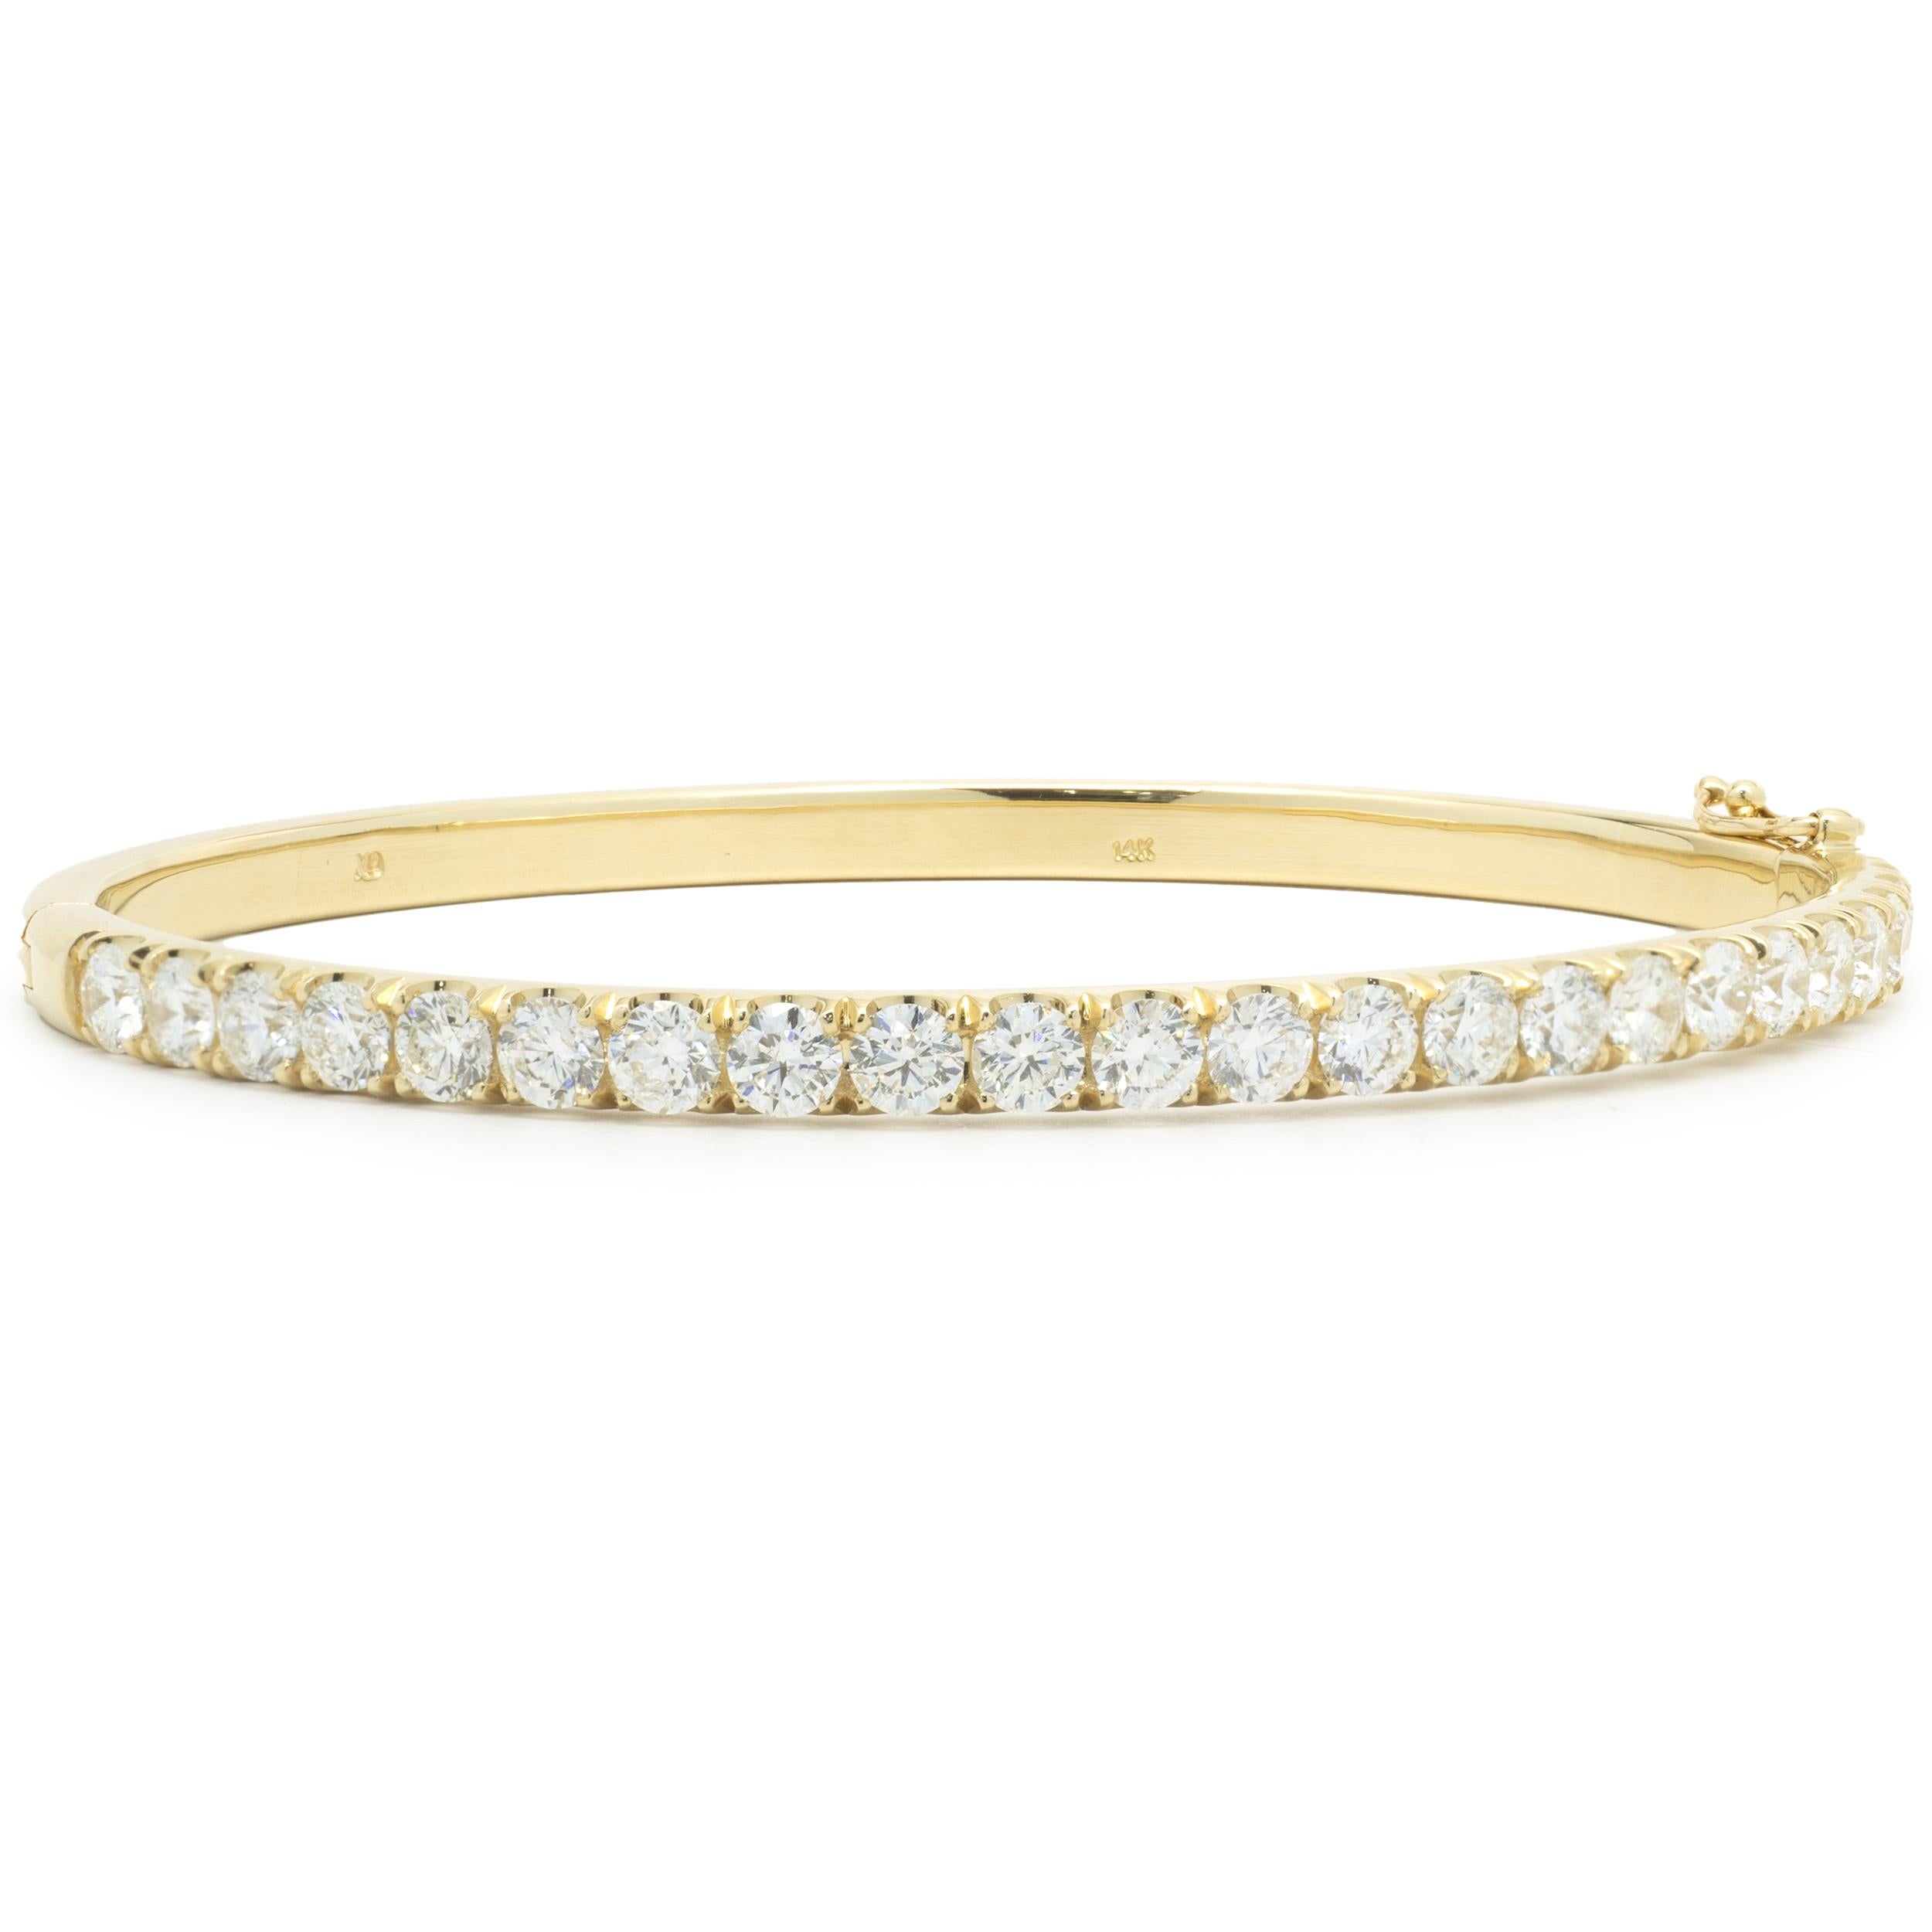 Designer: custom
Material: 14K yellow gold
Diamonds: 23 round brilliant cut = 3.82cttw
Color: H
Clarity: VS2
Dimensions: bracelet will fit up to a 7-inch wrist
Weight: 20.30 grams
